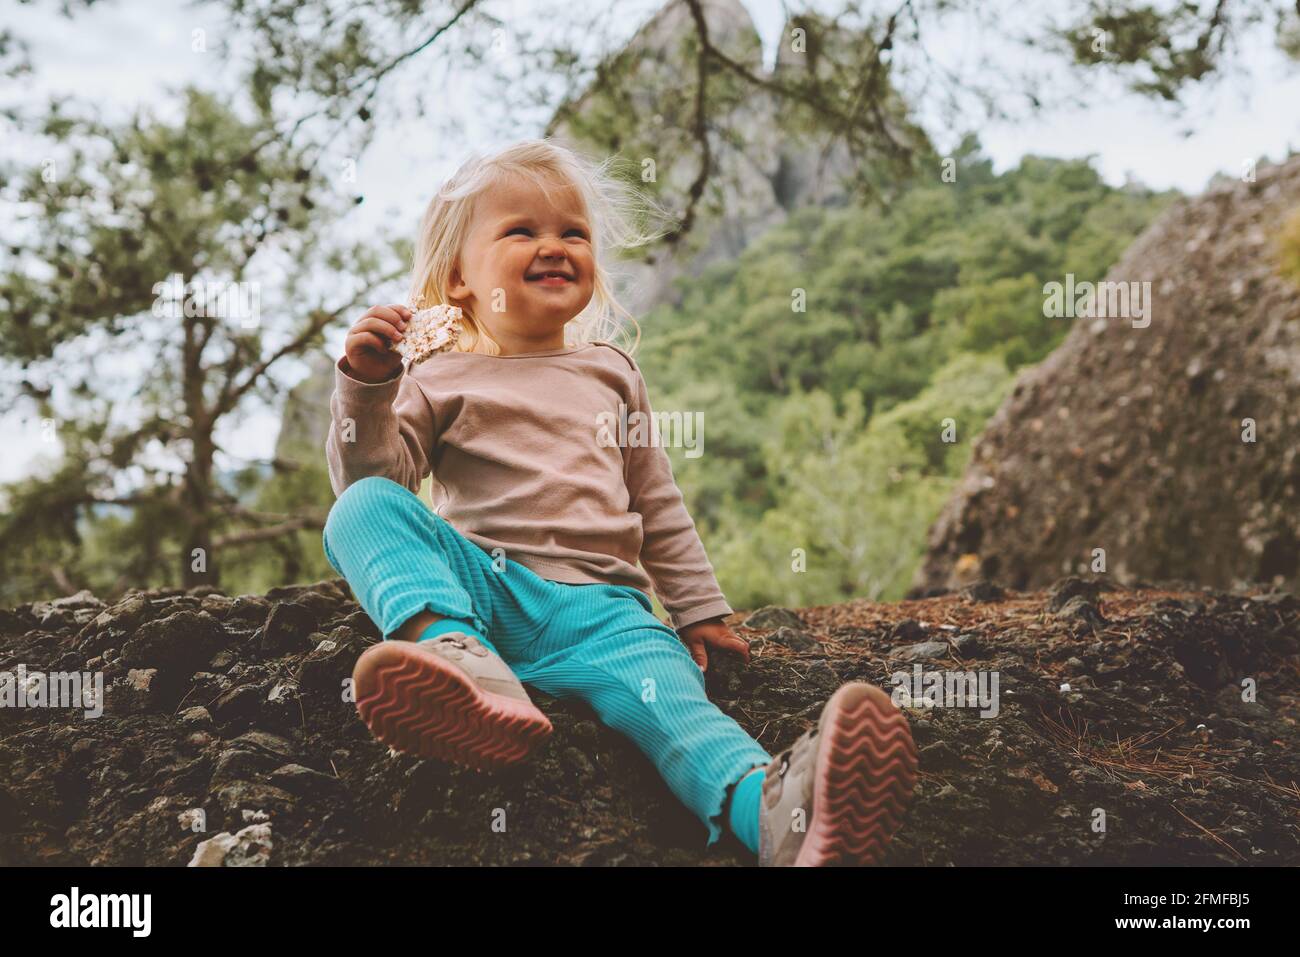 Child eating cookies outdoor in forest travel family vacation baby girl on picnic healthy lifestyle Stock Photo